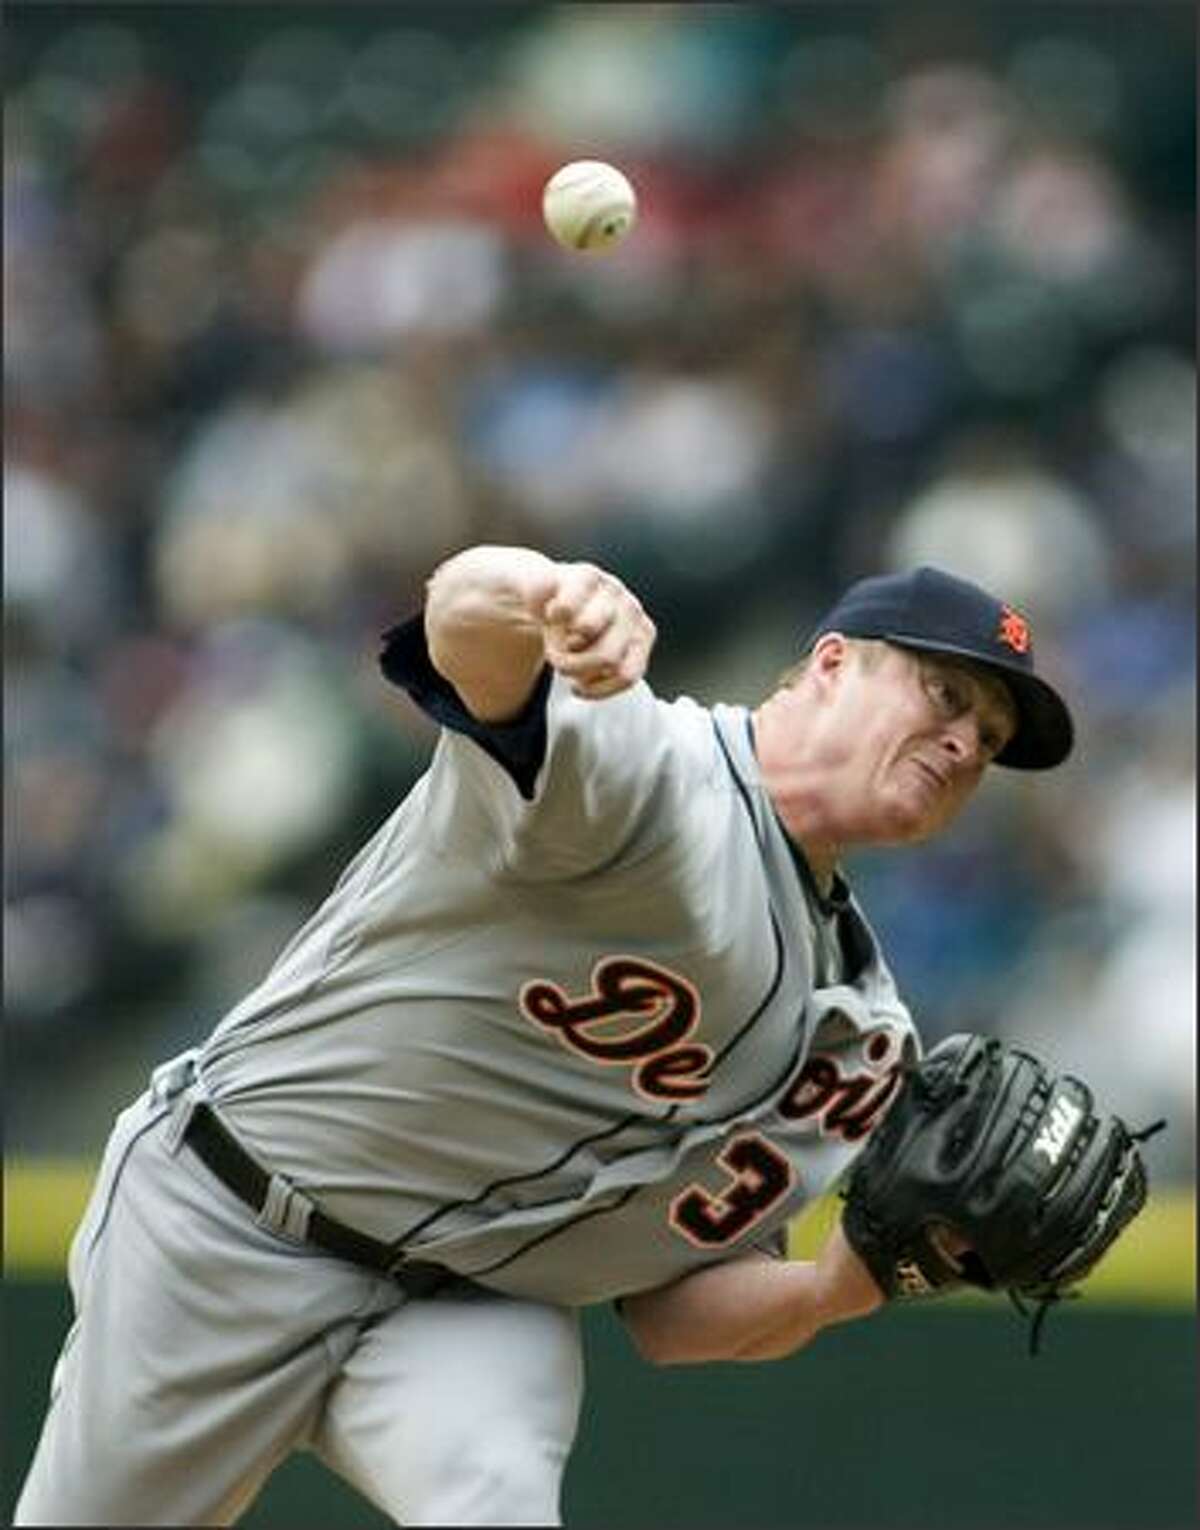 Detroit Tigers starter Jeremy Bonderman pitches against the Seattle Mariners in the first inning.